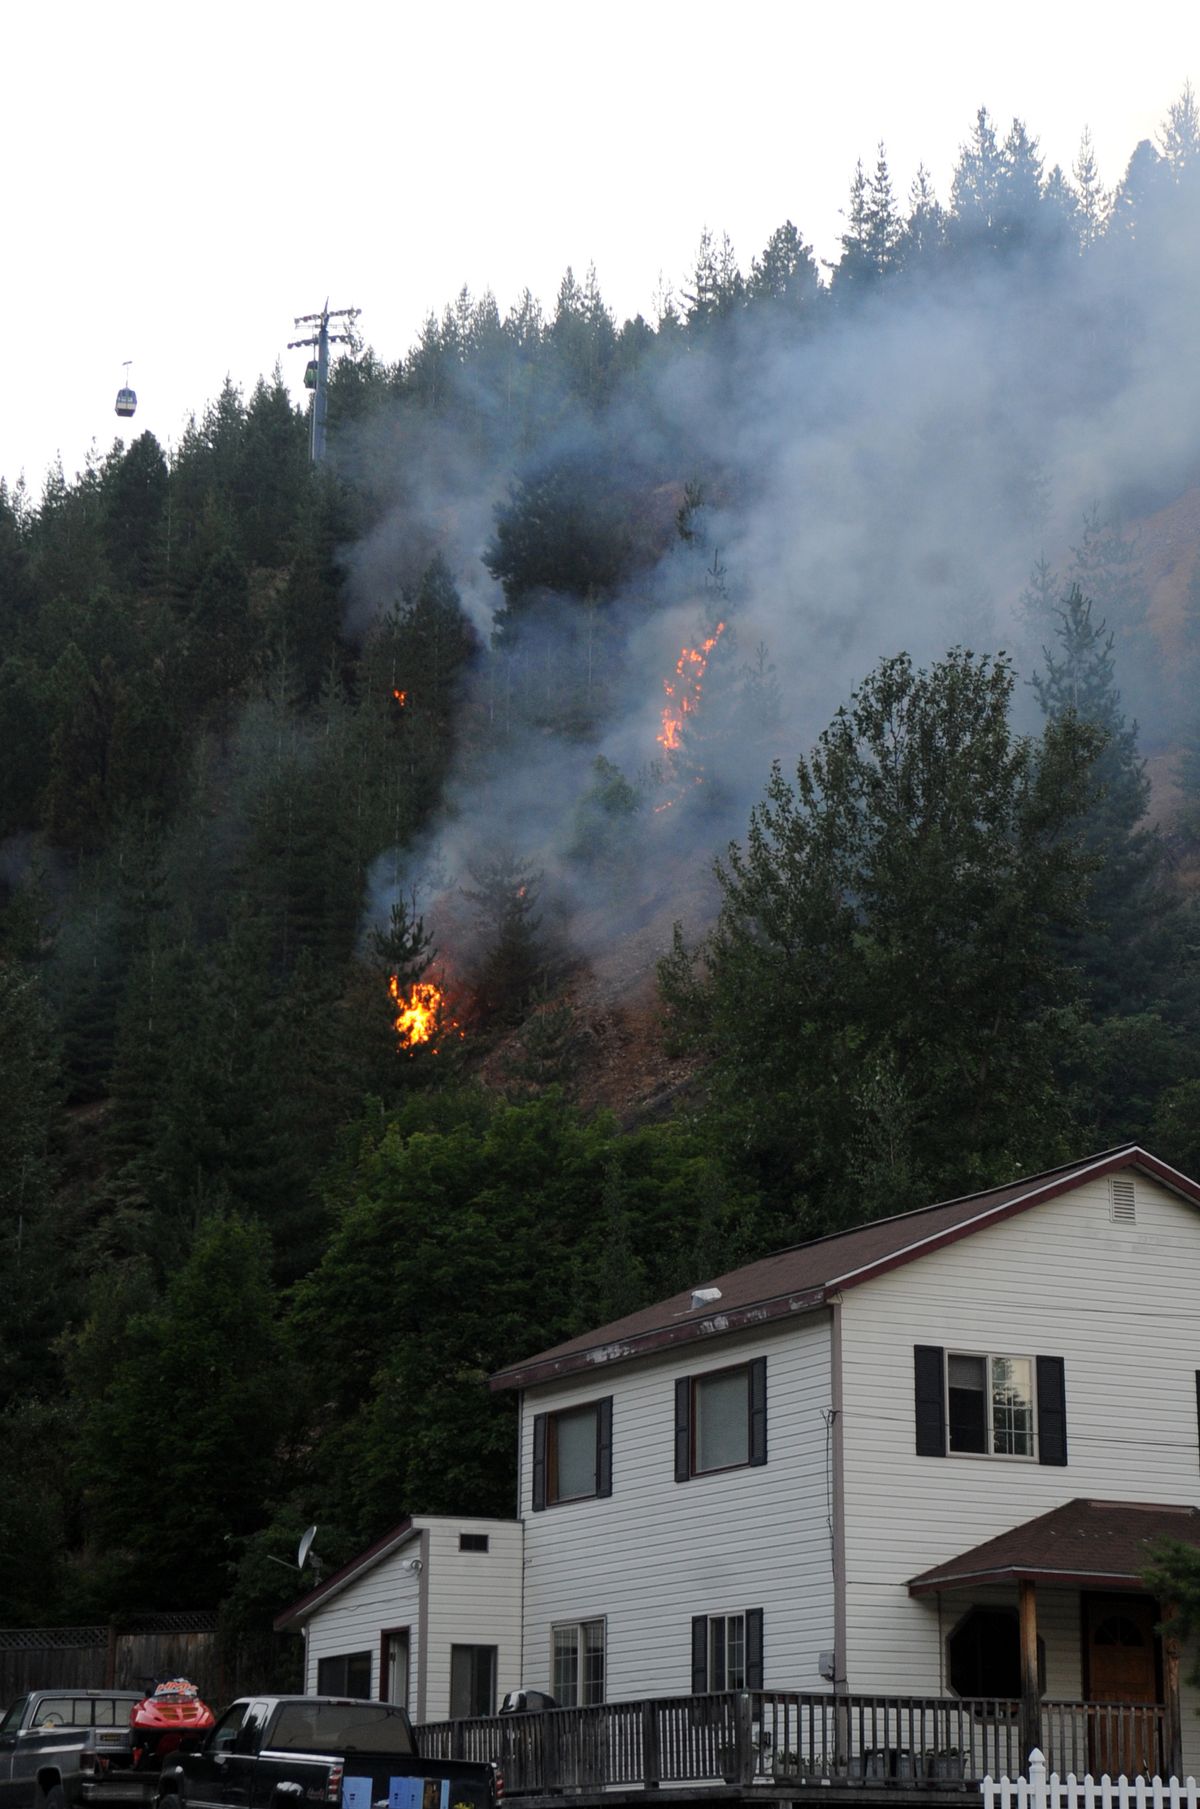 Hot spots flare up above homes near Kellogg on Wednesday. A wildfire started behind some homes there and rushed up the steep hillsides Wednesday afternoon, briefly forcing authorities to talk about evacuation plans. By nightfall, the fire’s spread was slowed. (Jesse Tinsley)